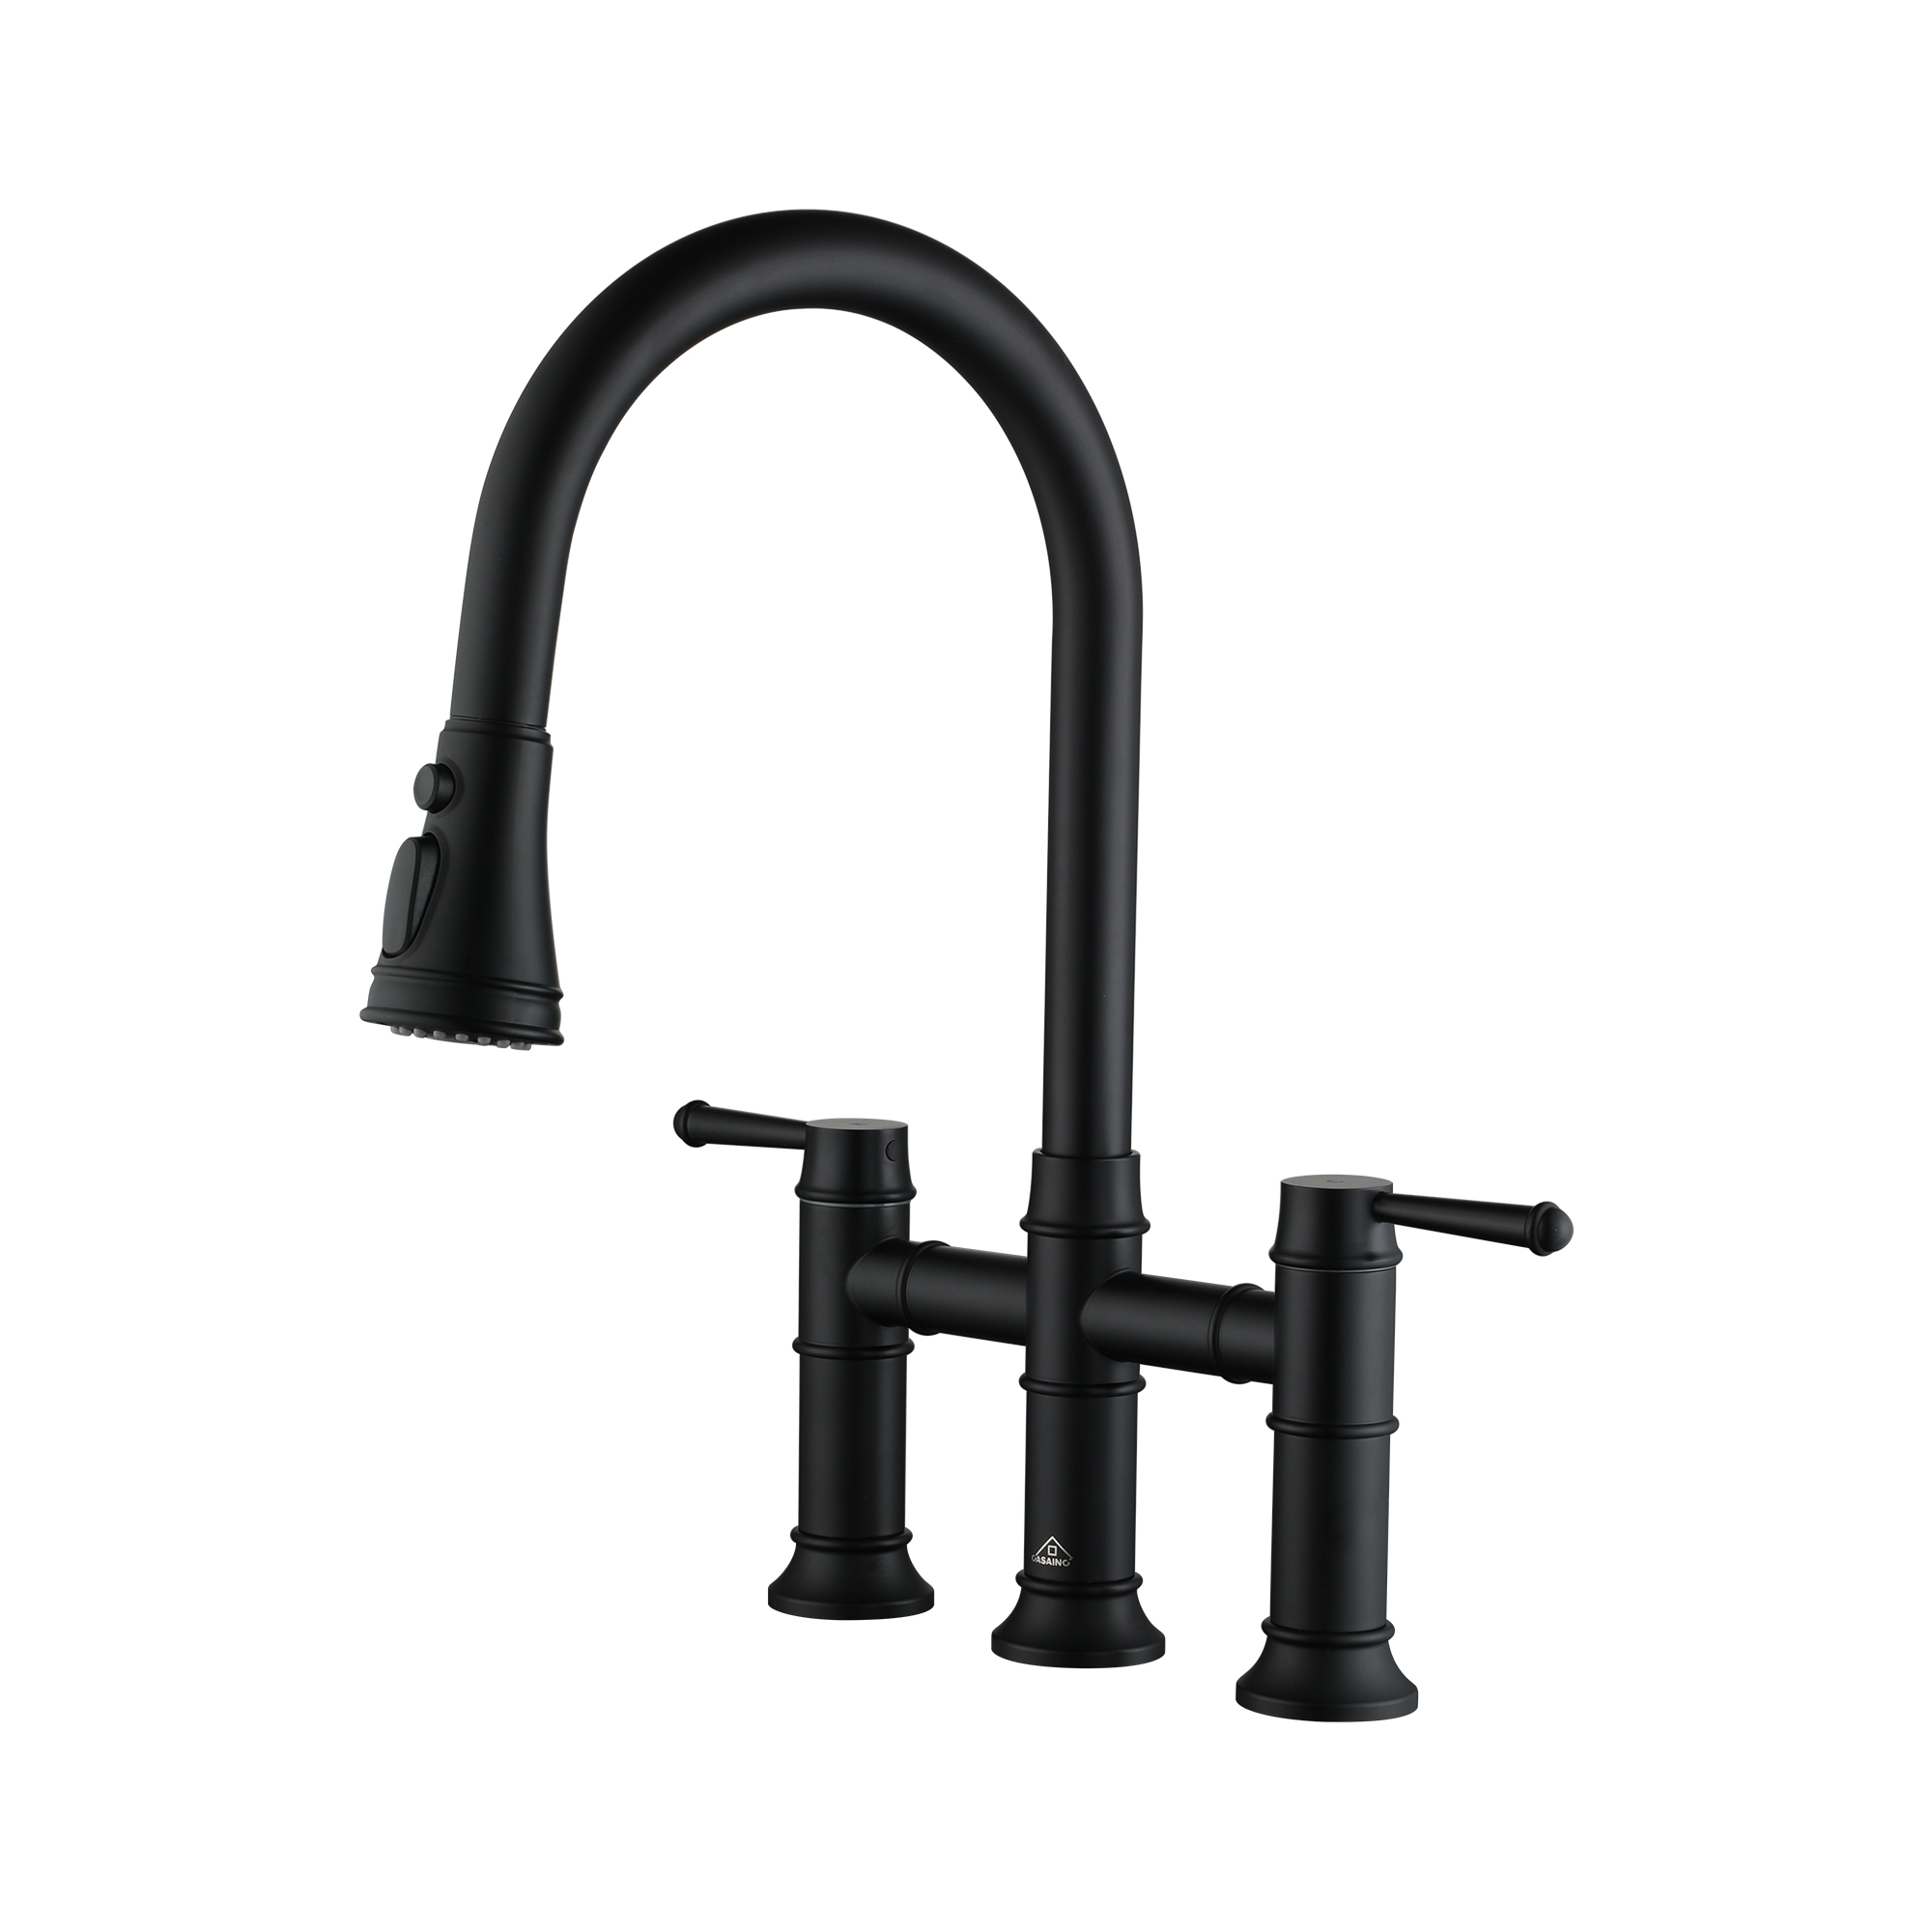 3 Hole Two Handle Kitchen Faucet with Pull Down Sprayer 3 Modes Bridge Faucet Hot Sale Two Handle Kitchen Faucets for Sink Countertop with a Variety of Colors & Options